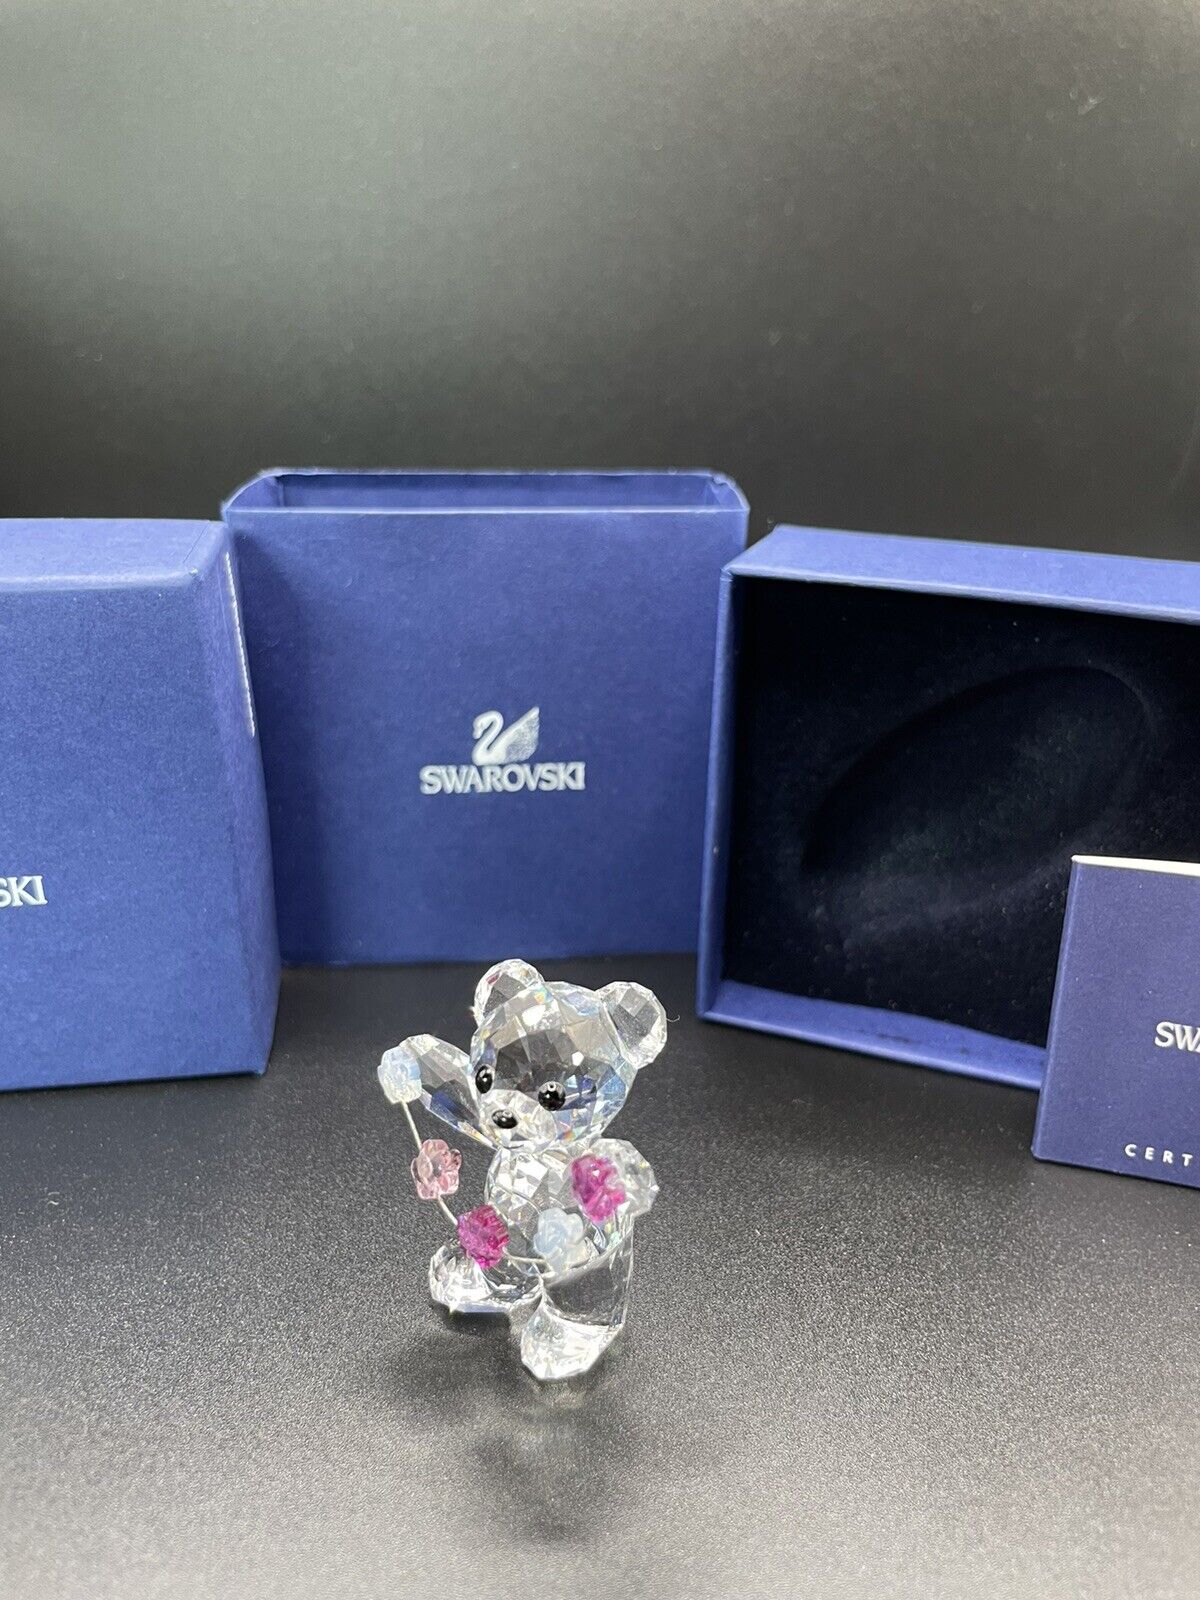 Swarovski Crystal Kris Bear Flowers for You 1016620 688051 W/PlacticBox And COA